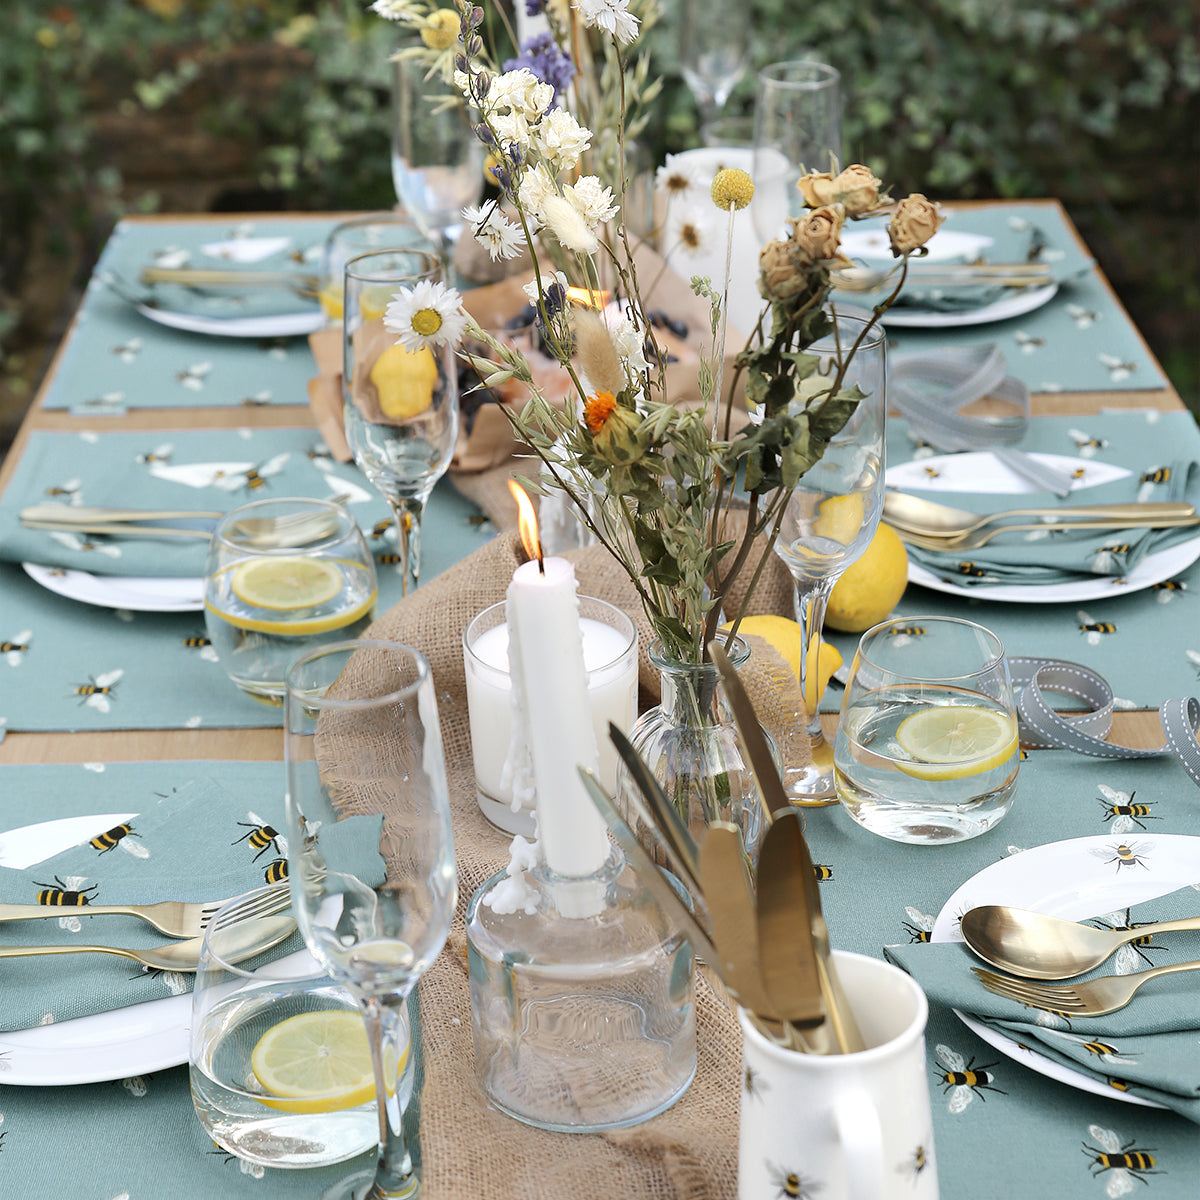 Dining alfresco with Sophie Allport Bees Teal Placemats